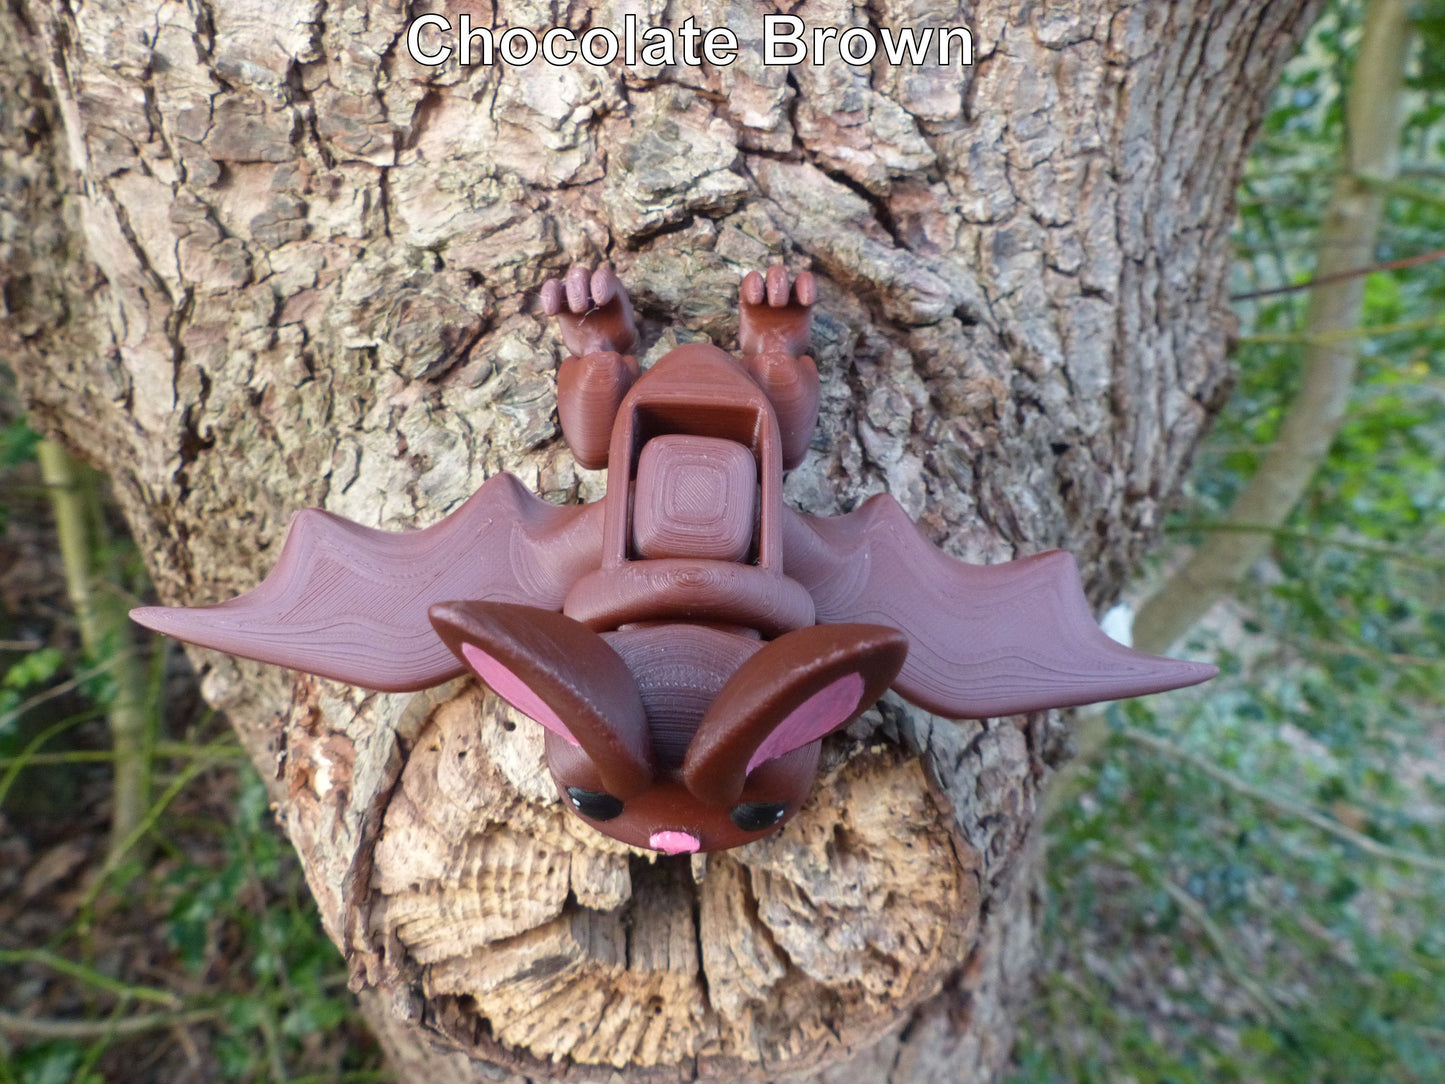 Flapping Long Eared Bat - Articulated Flexible 3D Print - Professionally Hand painted finishing details